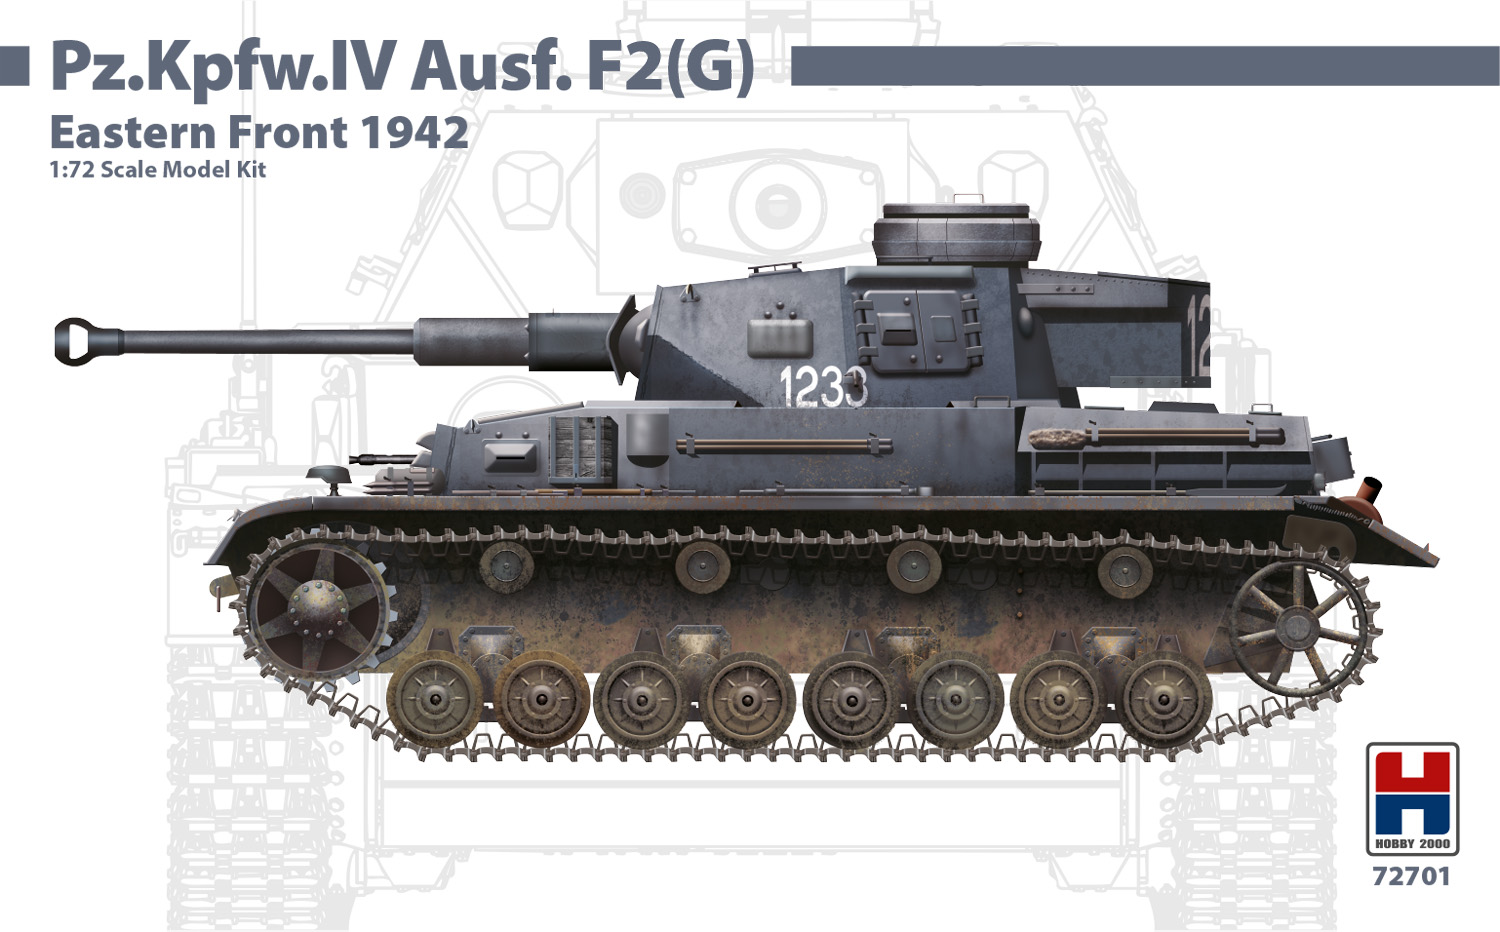 Pz.Kpfw.IV Ausf.F2 (G) - Eastern Front 1942